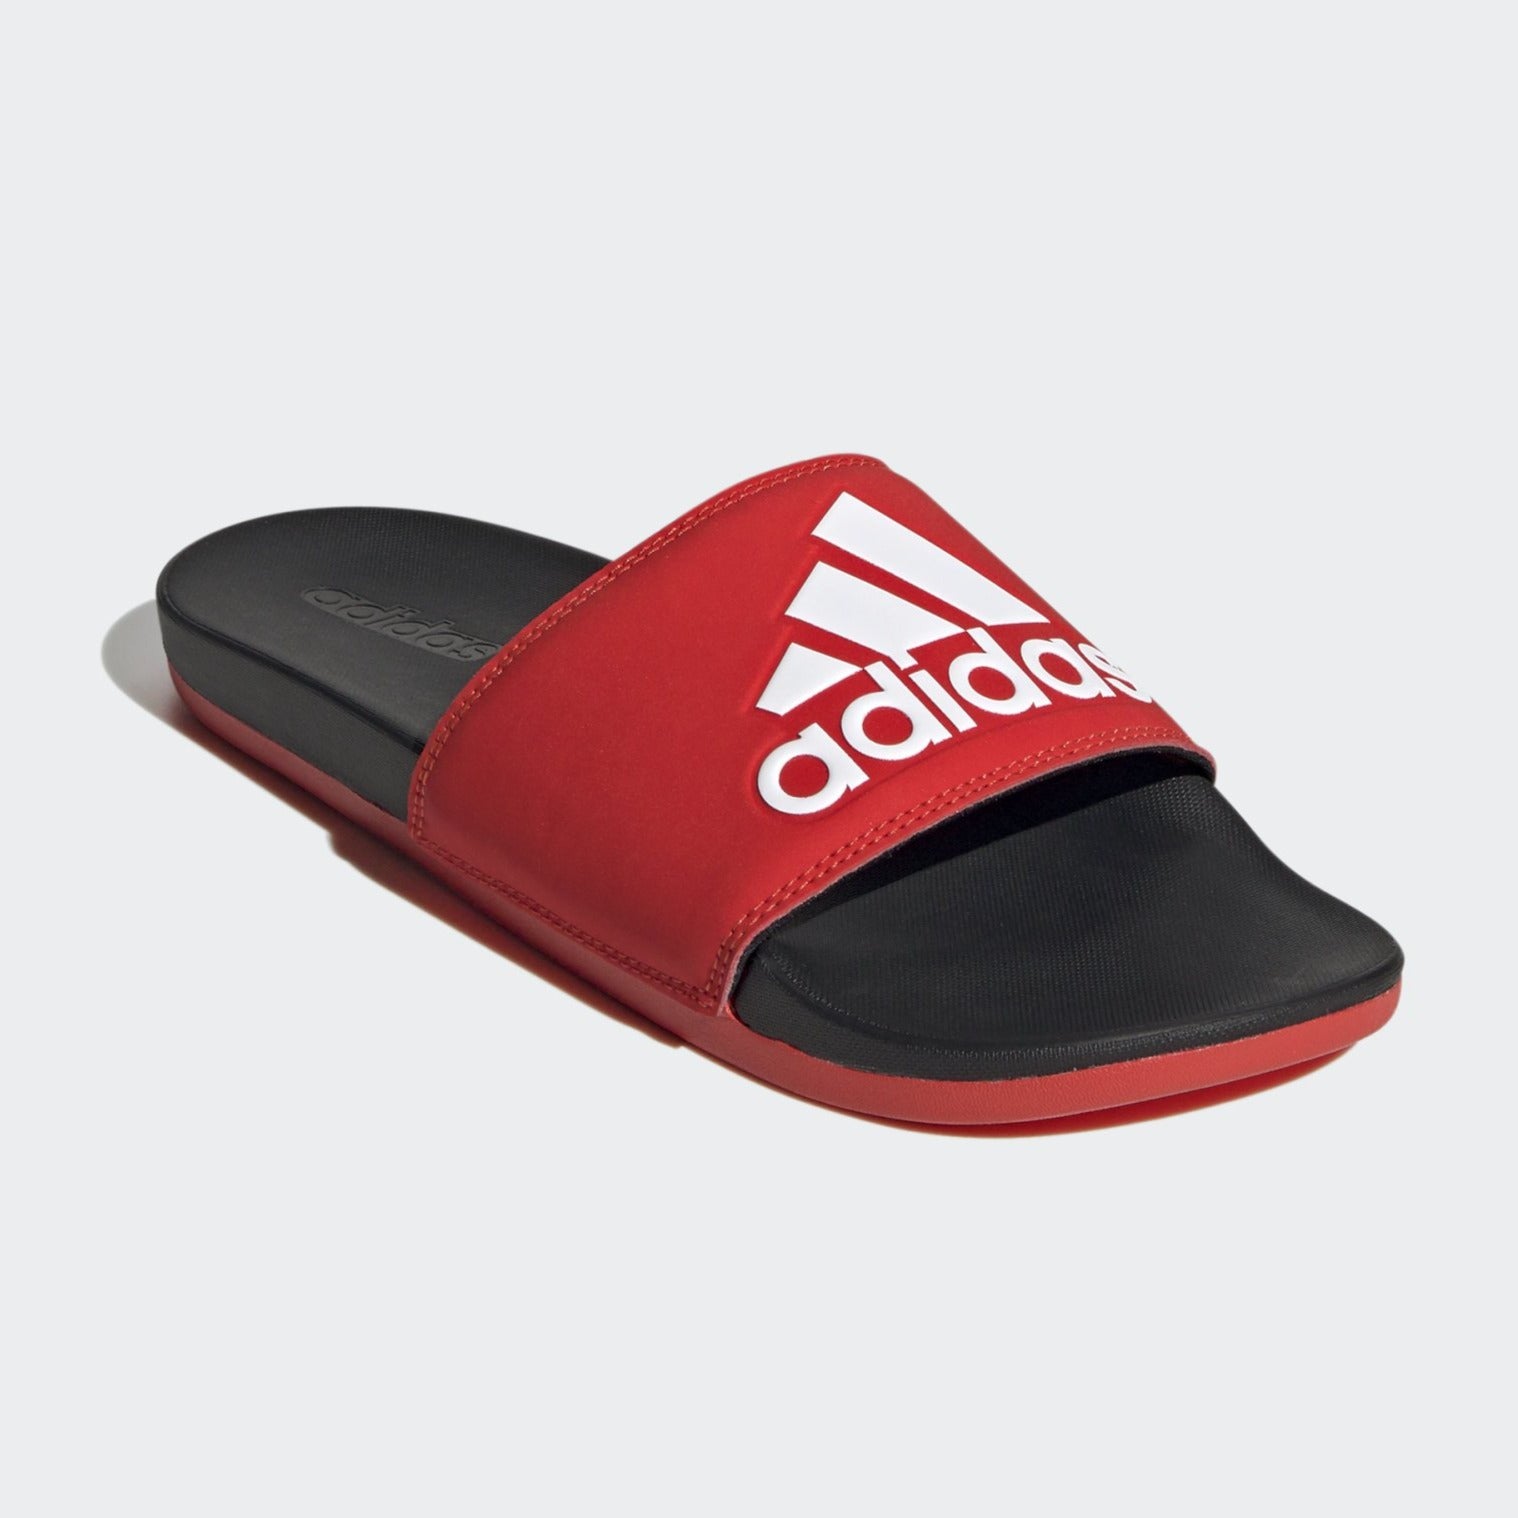 adidas cloudfoam red and black